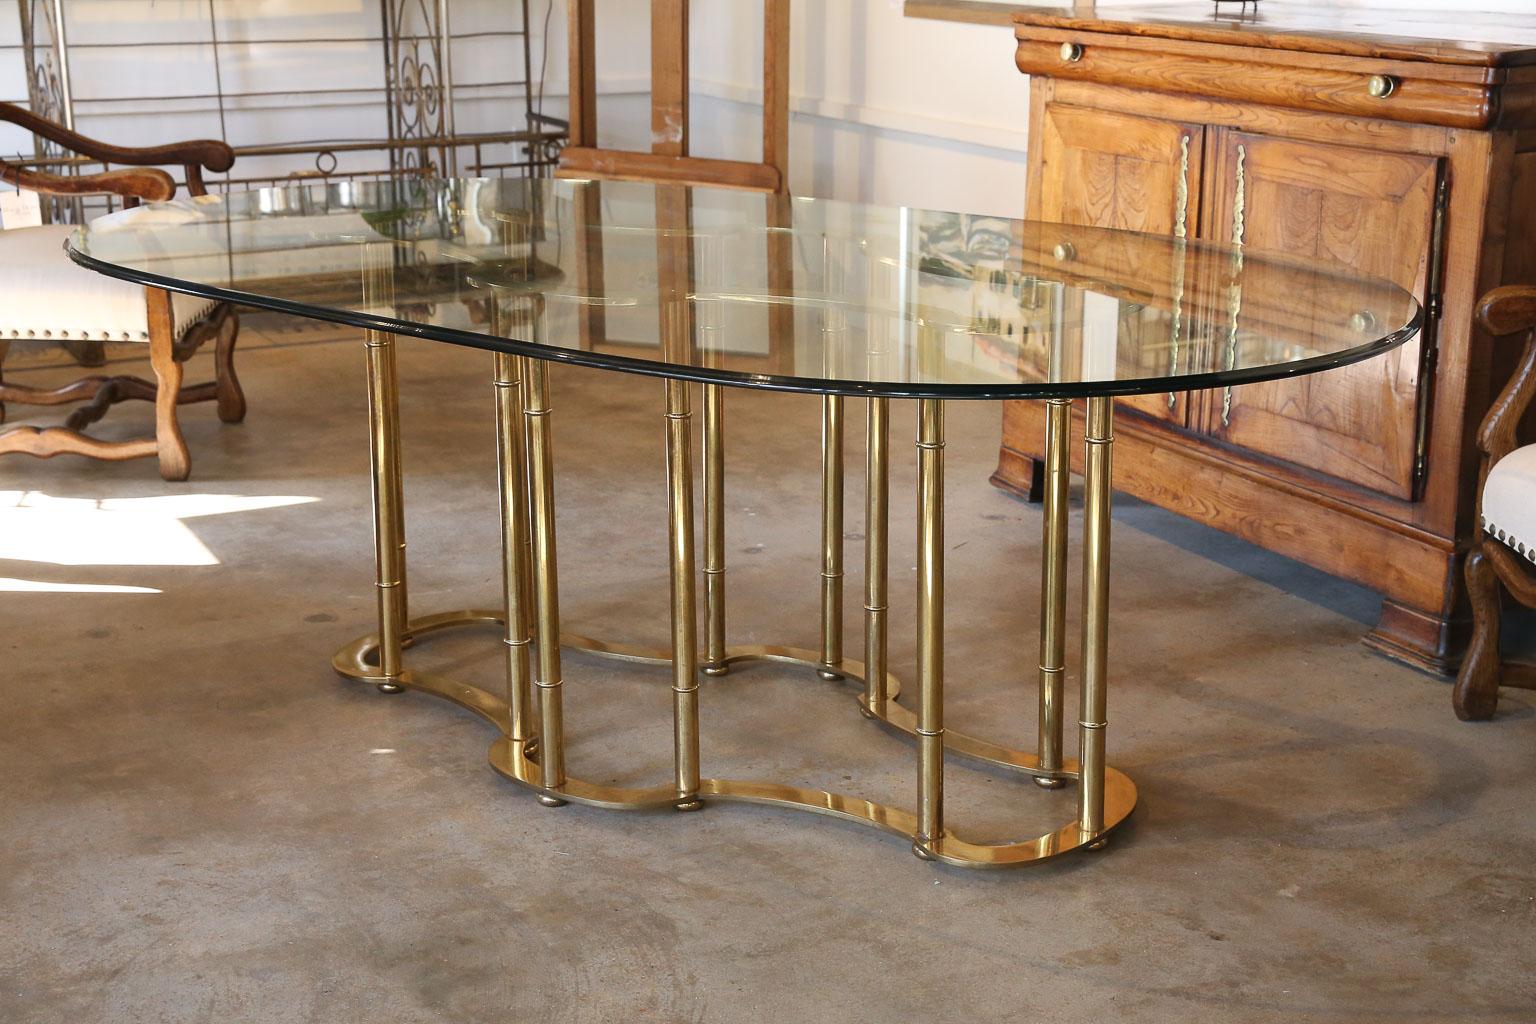 Beautiful brass Mastercraft dining table with original oval beveled glass top. The brass base consists of 12 vertical supports with a flat racetrack top and bottom supported on 12 bun feet. The original beveled glass top has light scratch markings